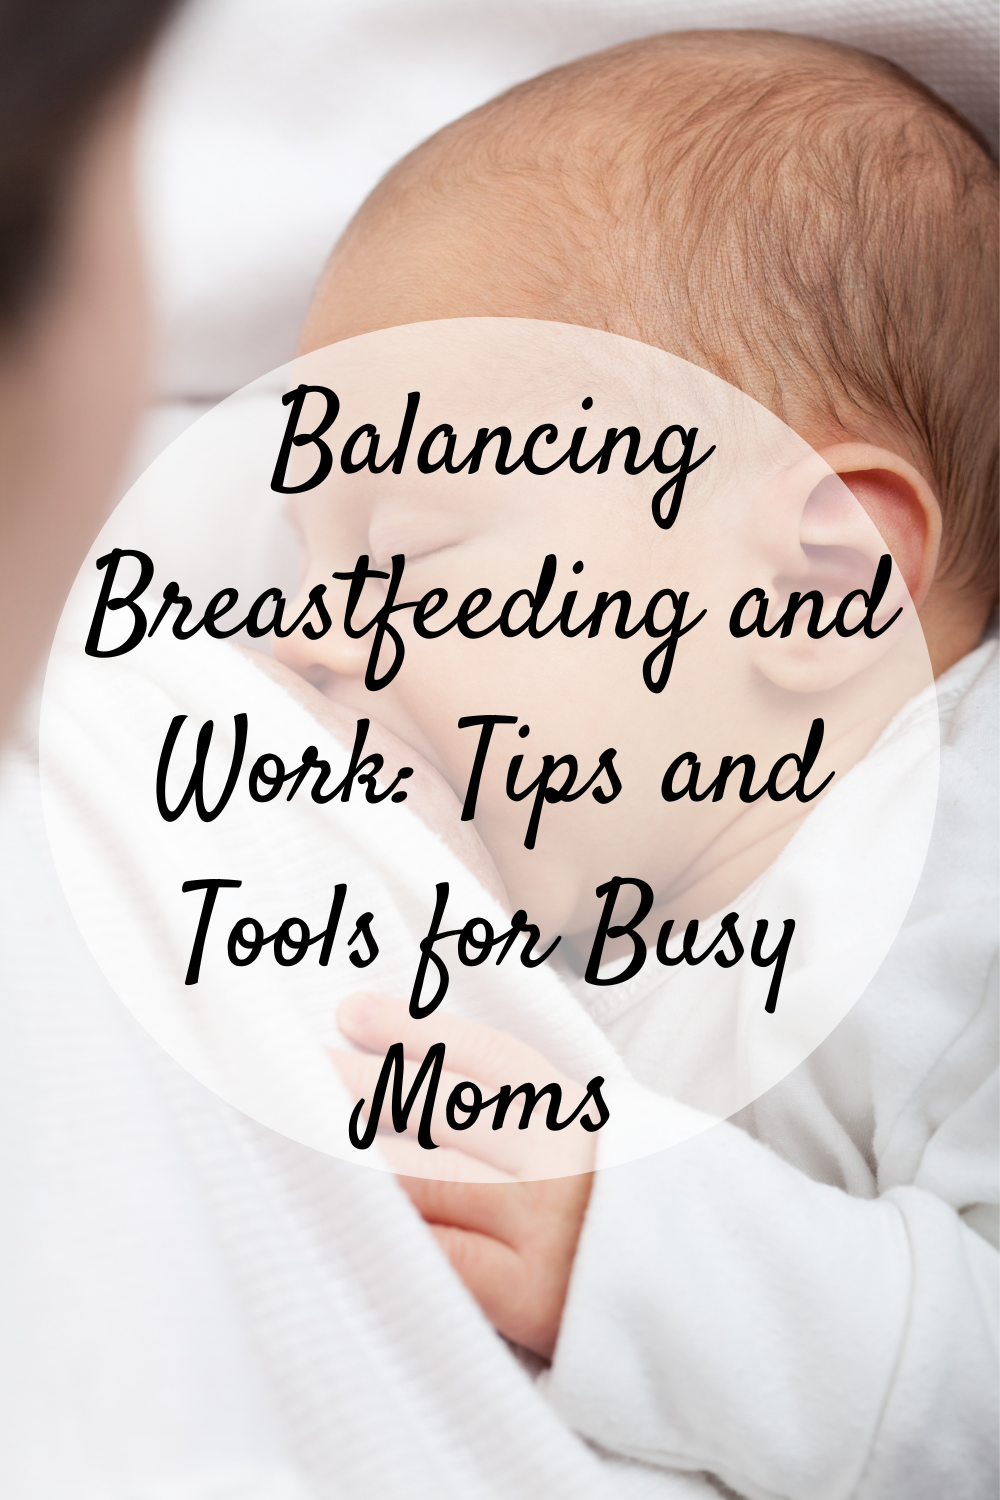 https://momandmore.com/wp-content/uploads/2023/08/Balancing-Breastfeeding-and-Work-Tips-and-Tools-for-Busy-Moms.png